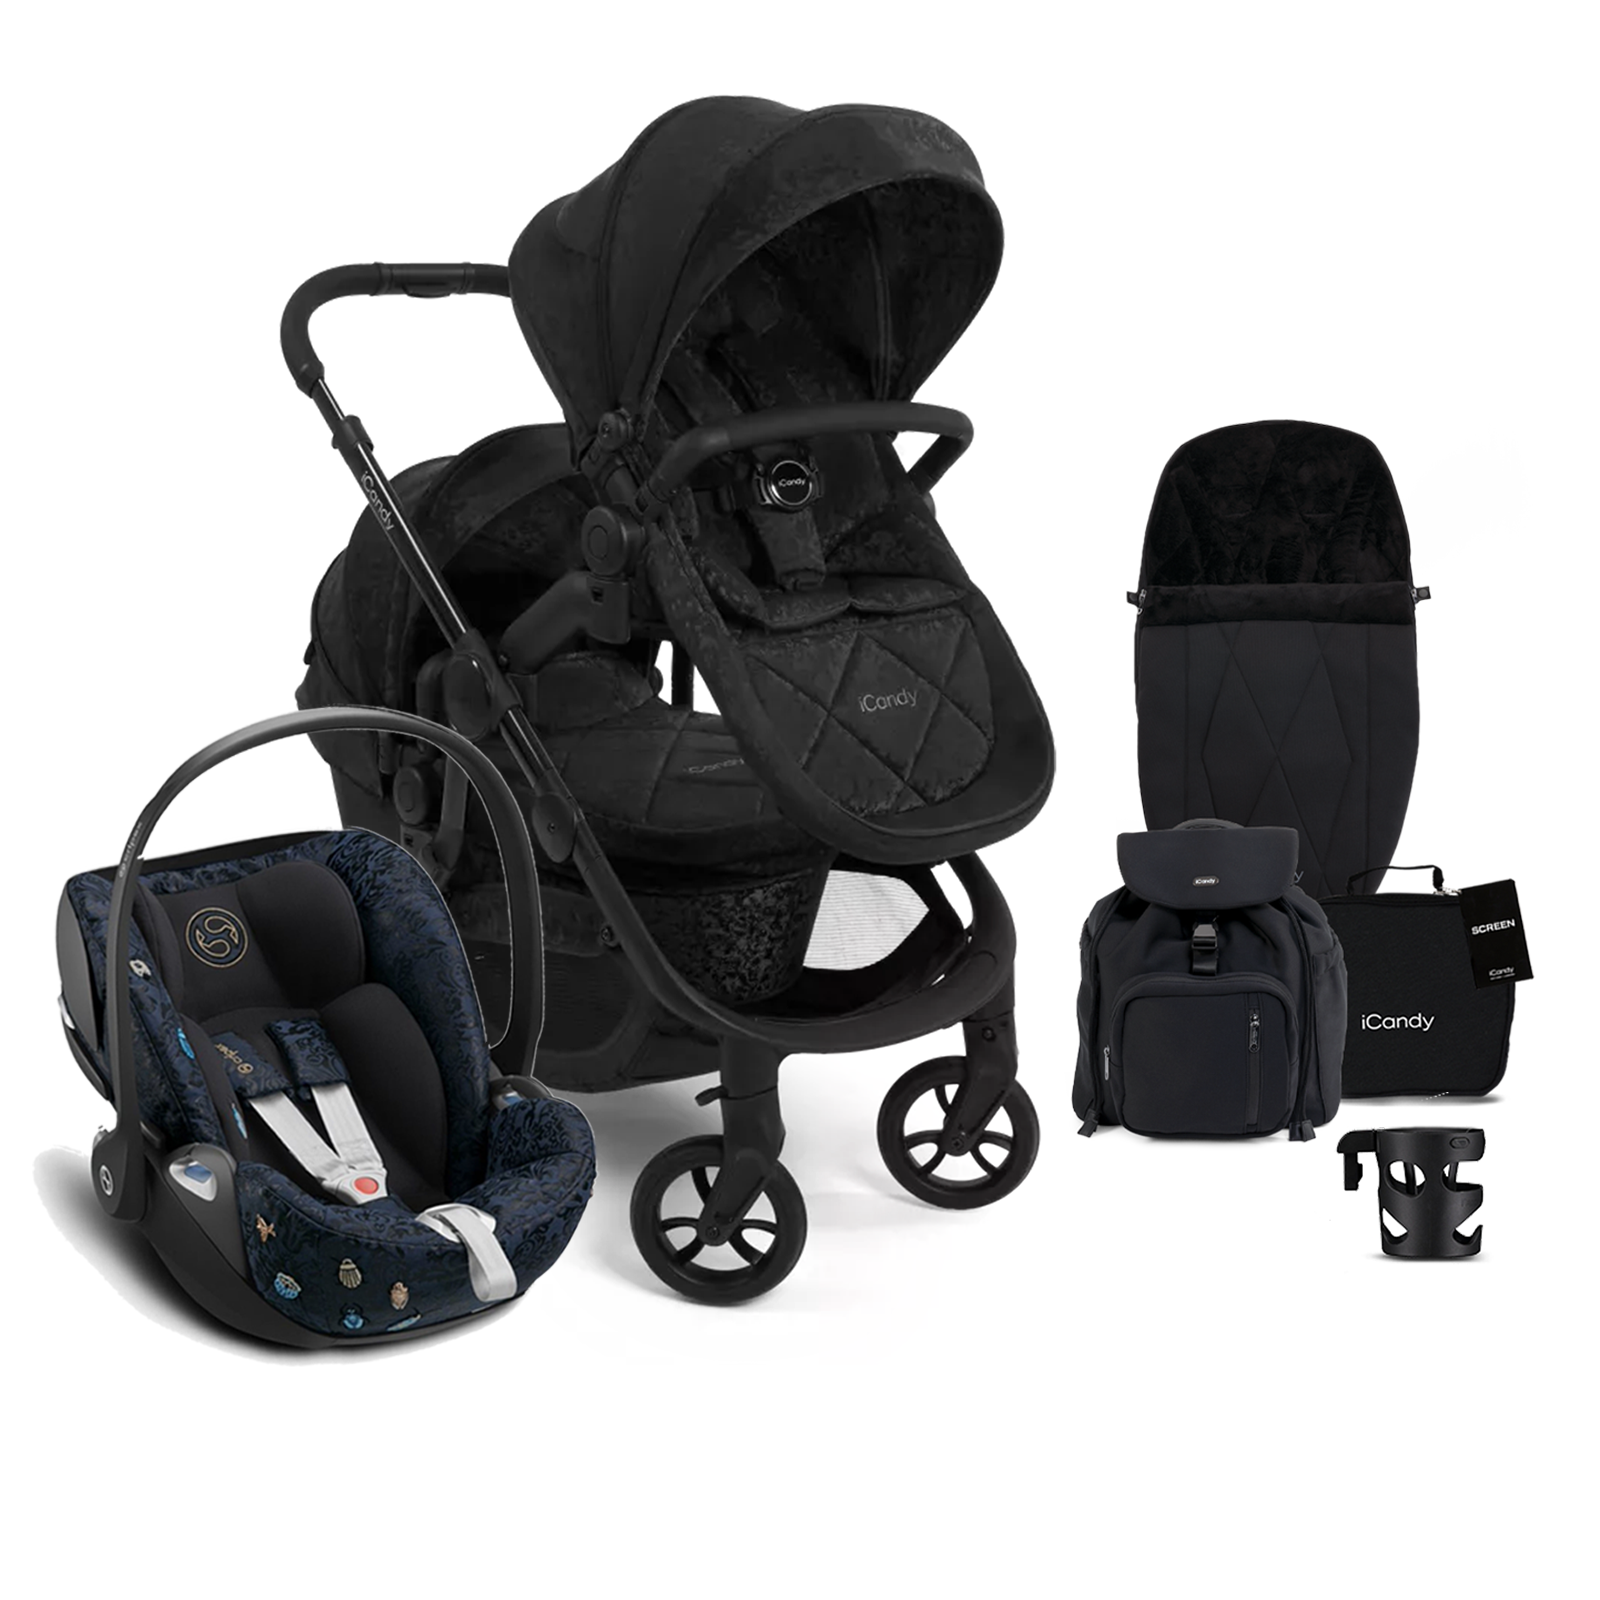 iCandy Orange 3 Double with Cloud Z Car Seat Complete 20 Piece Travel System Summer Bundle - Black Crush